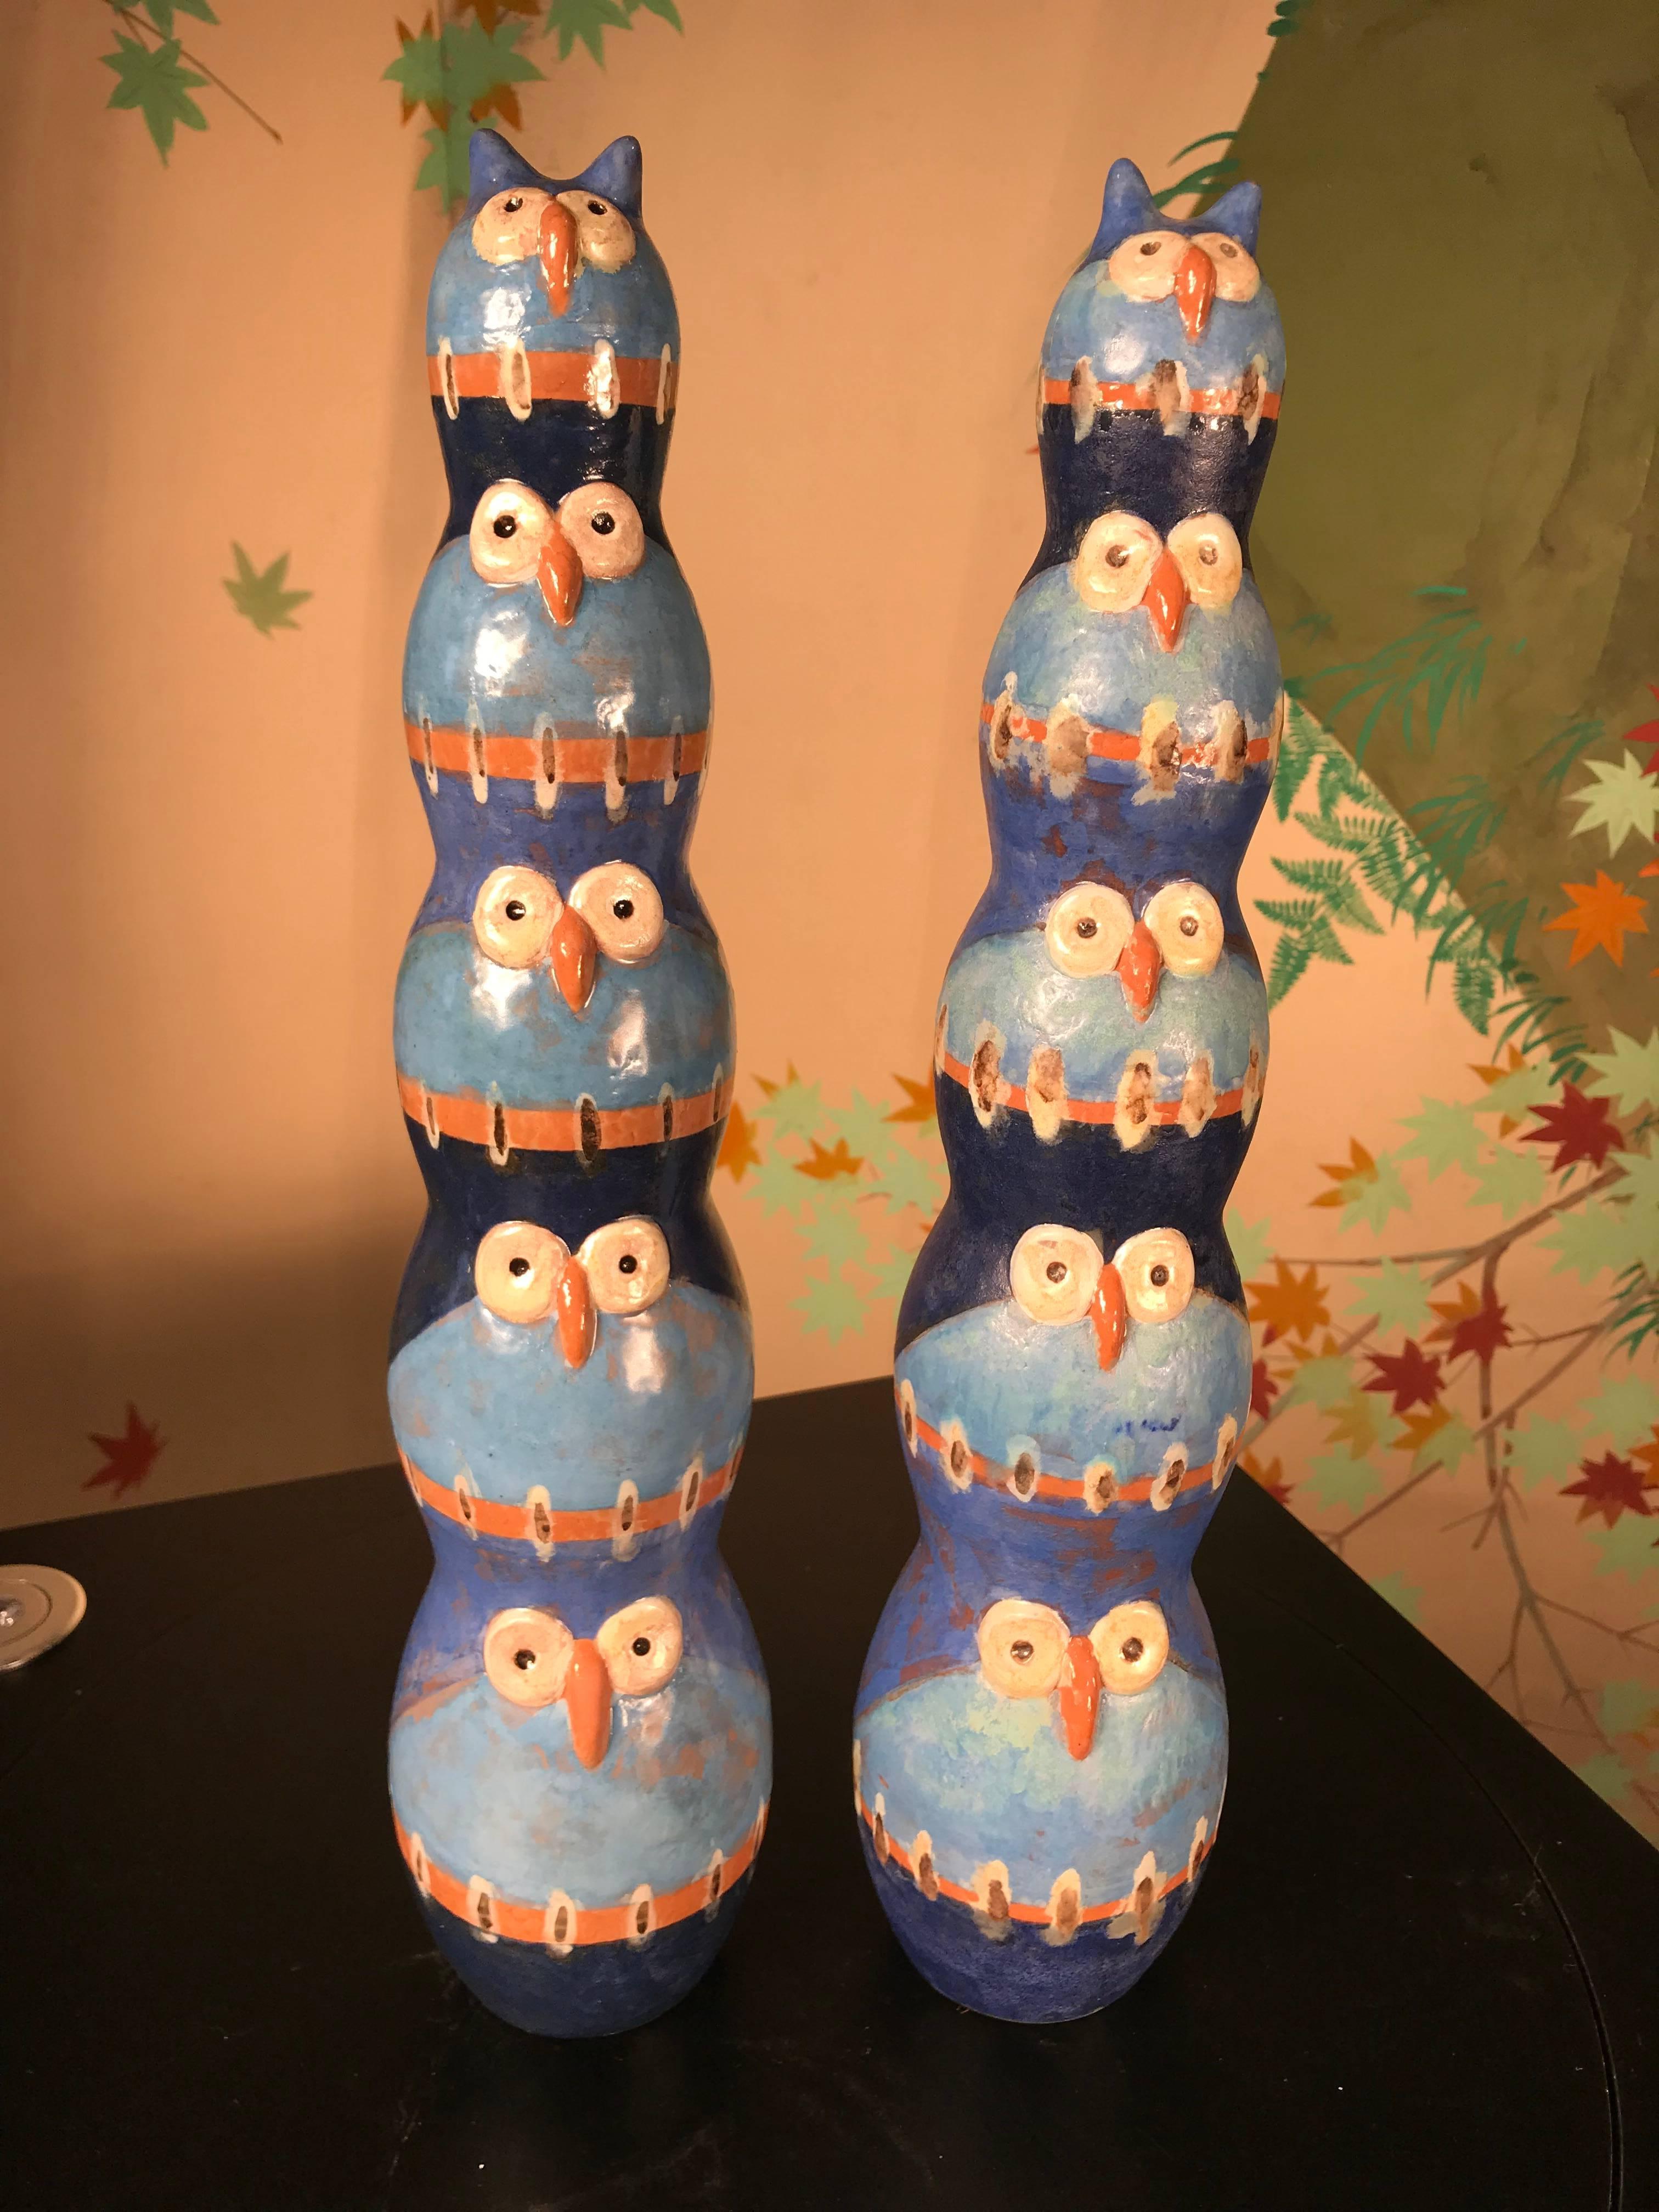 SALE - NOW SAVE 20% OR MORE

Unusual pair (2)  tall handmade and hand-painted five owl TOTEM sculptures by master artisan Eva Fritz-Linder. 
 
Designer/Maker: Eva Fritz-Lindner (1933-2017) 
and with her stamp i3D circa about 1970

Glaze: The matte